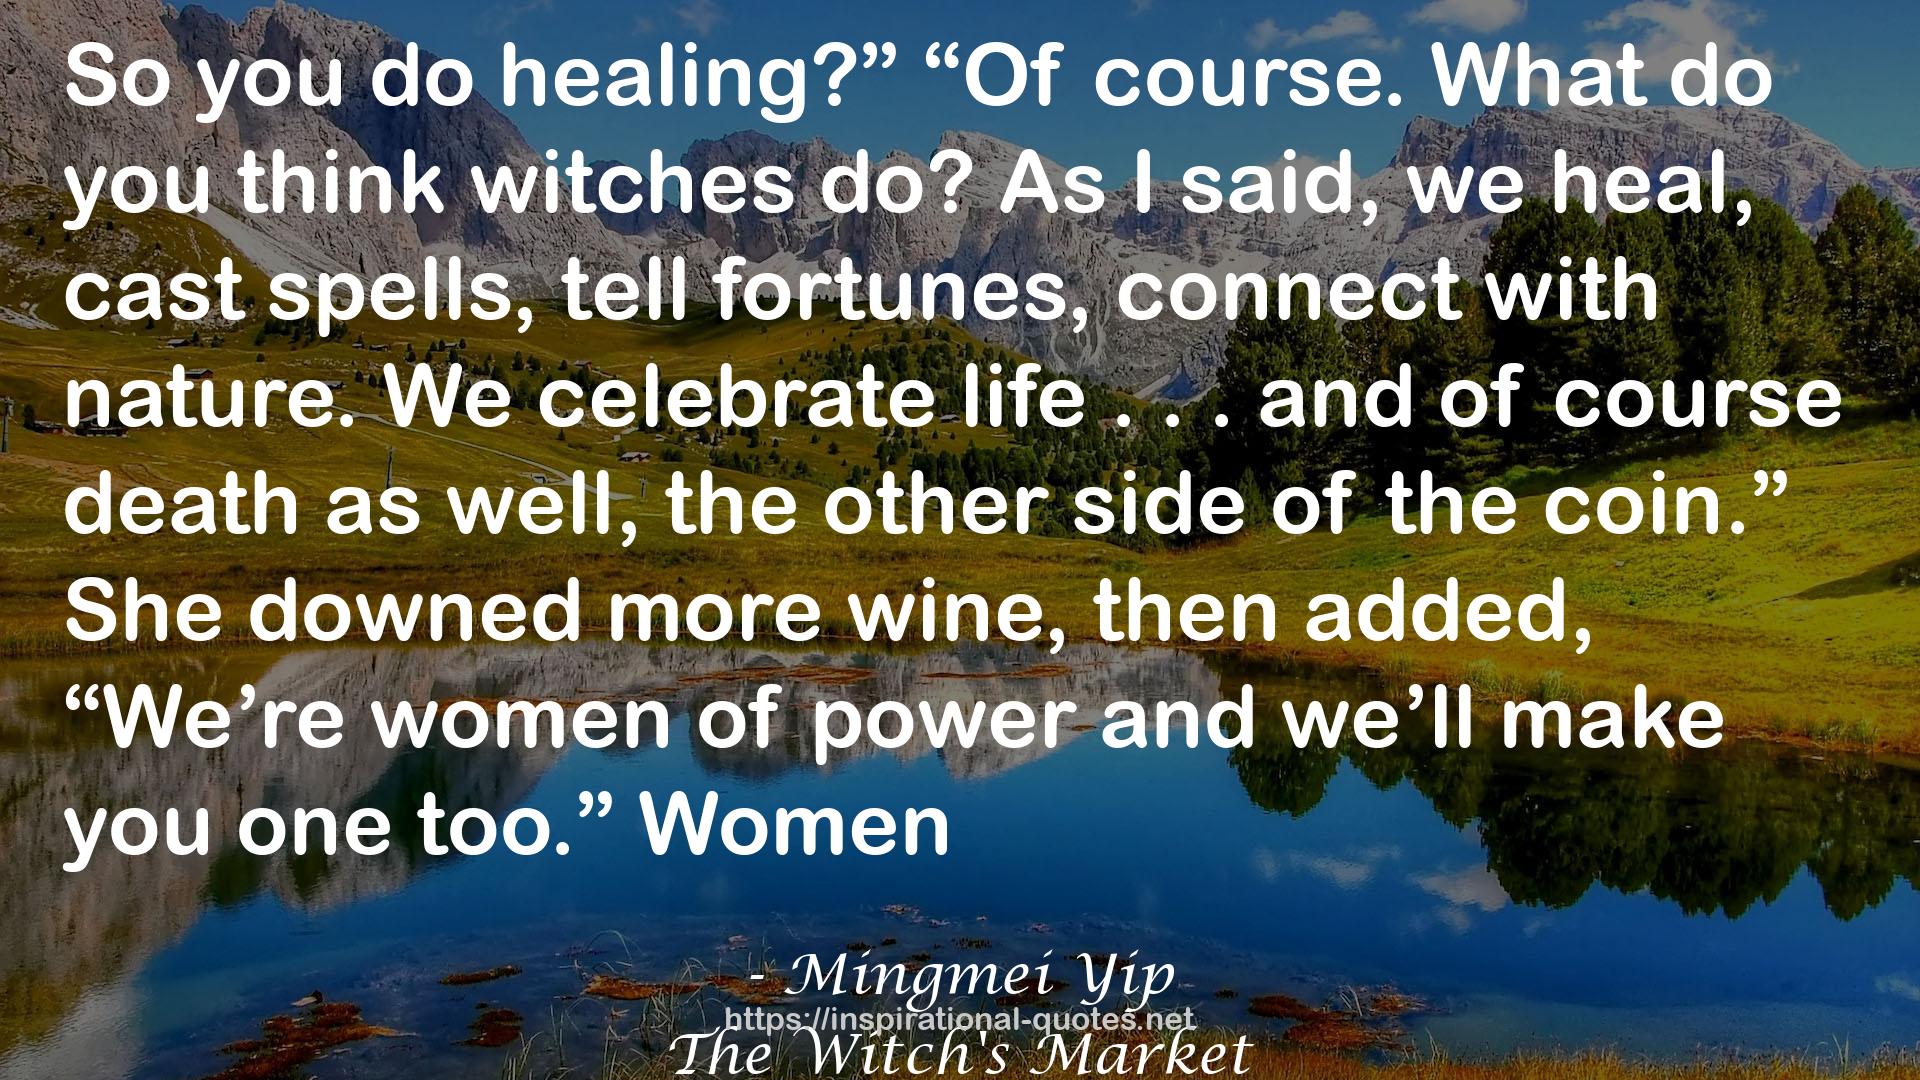 The Witch's Market QUOTES